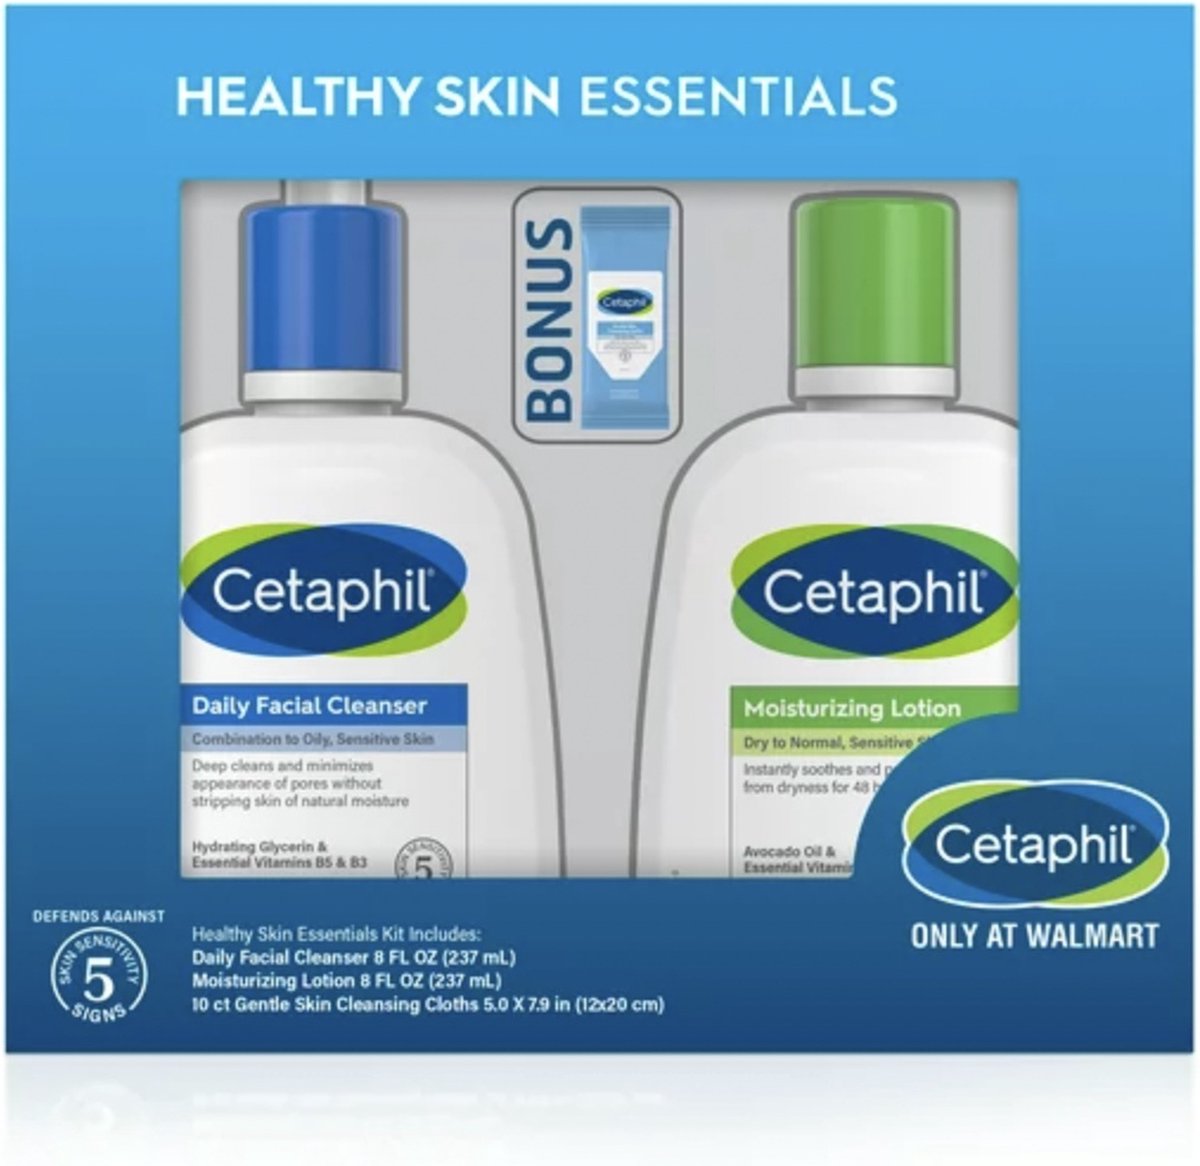 Cetaphil - Healthy Skin Care Set - Daily Facial Cleanser - Moisturizing Lotion - Cleansing Cloths